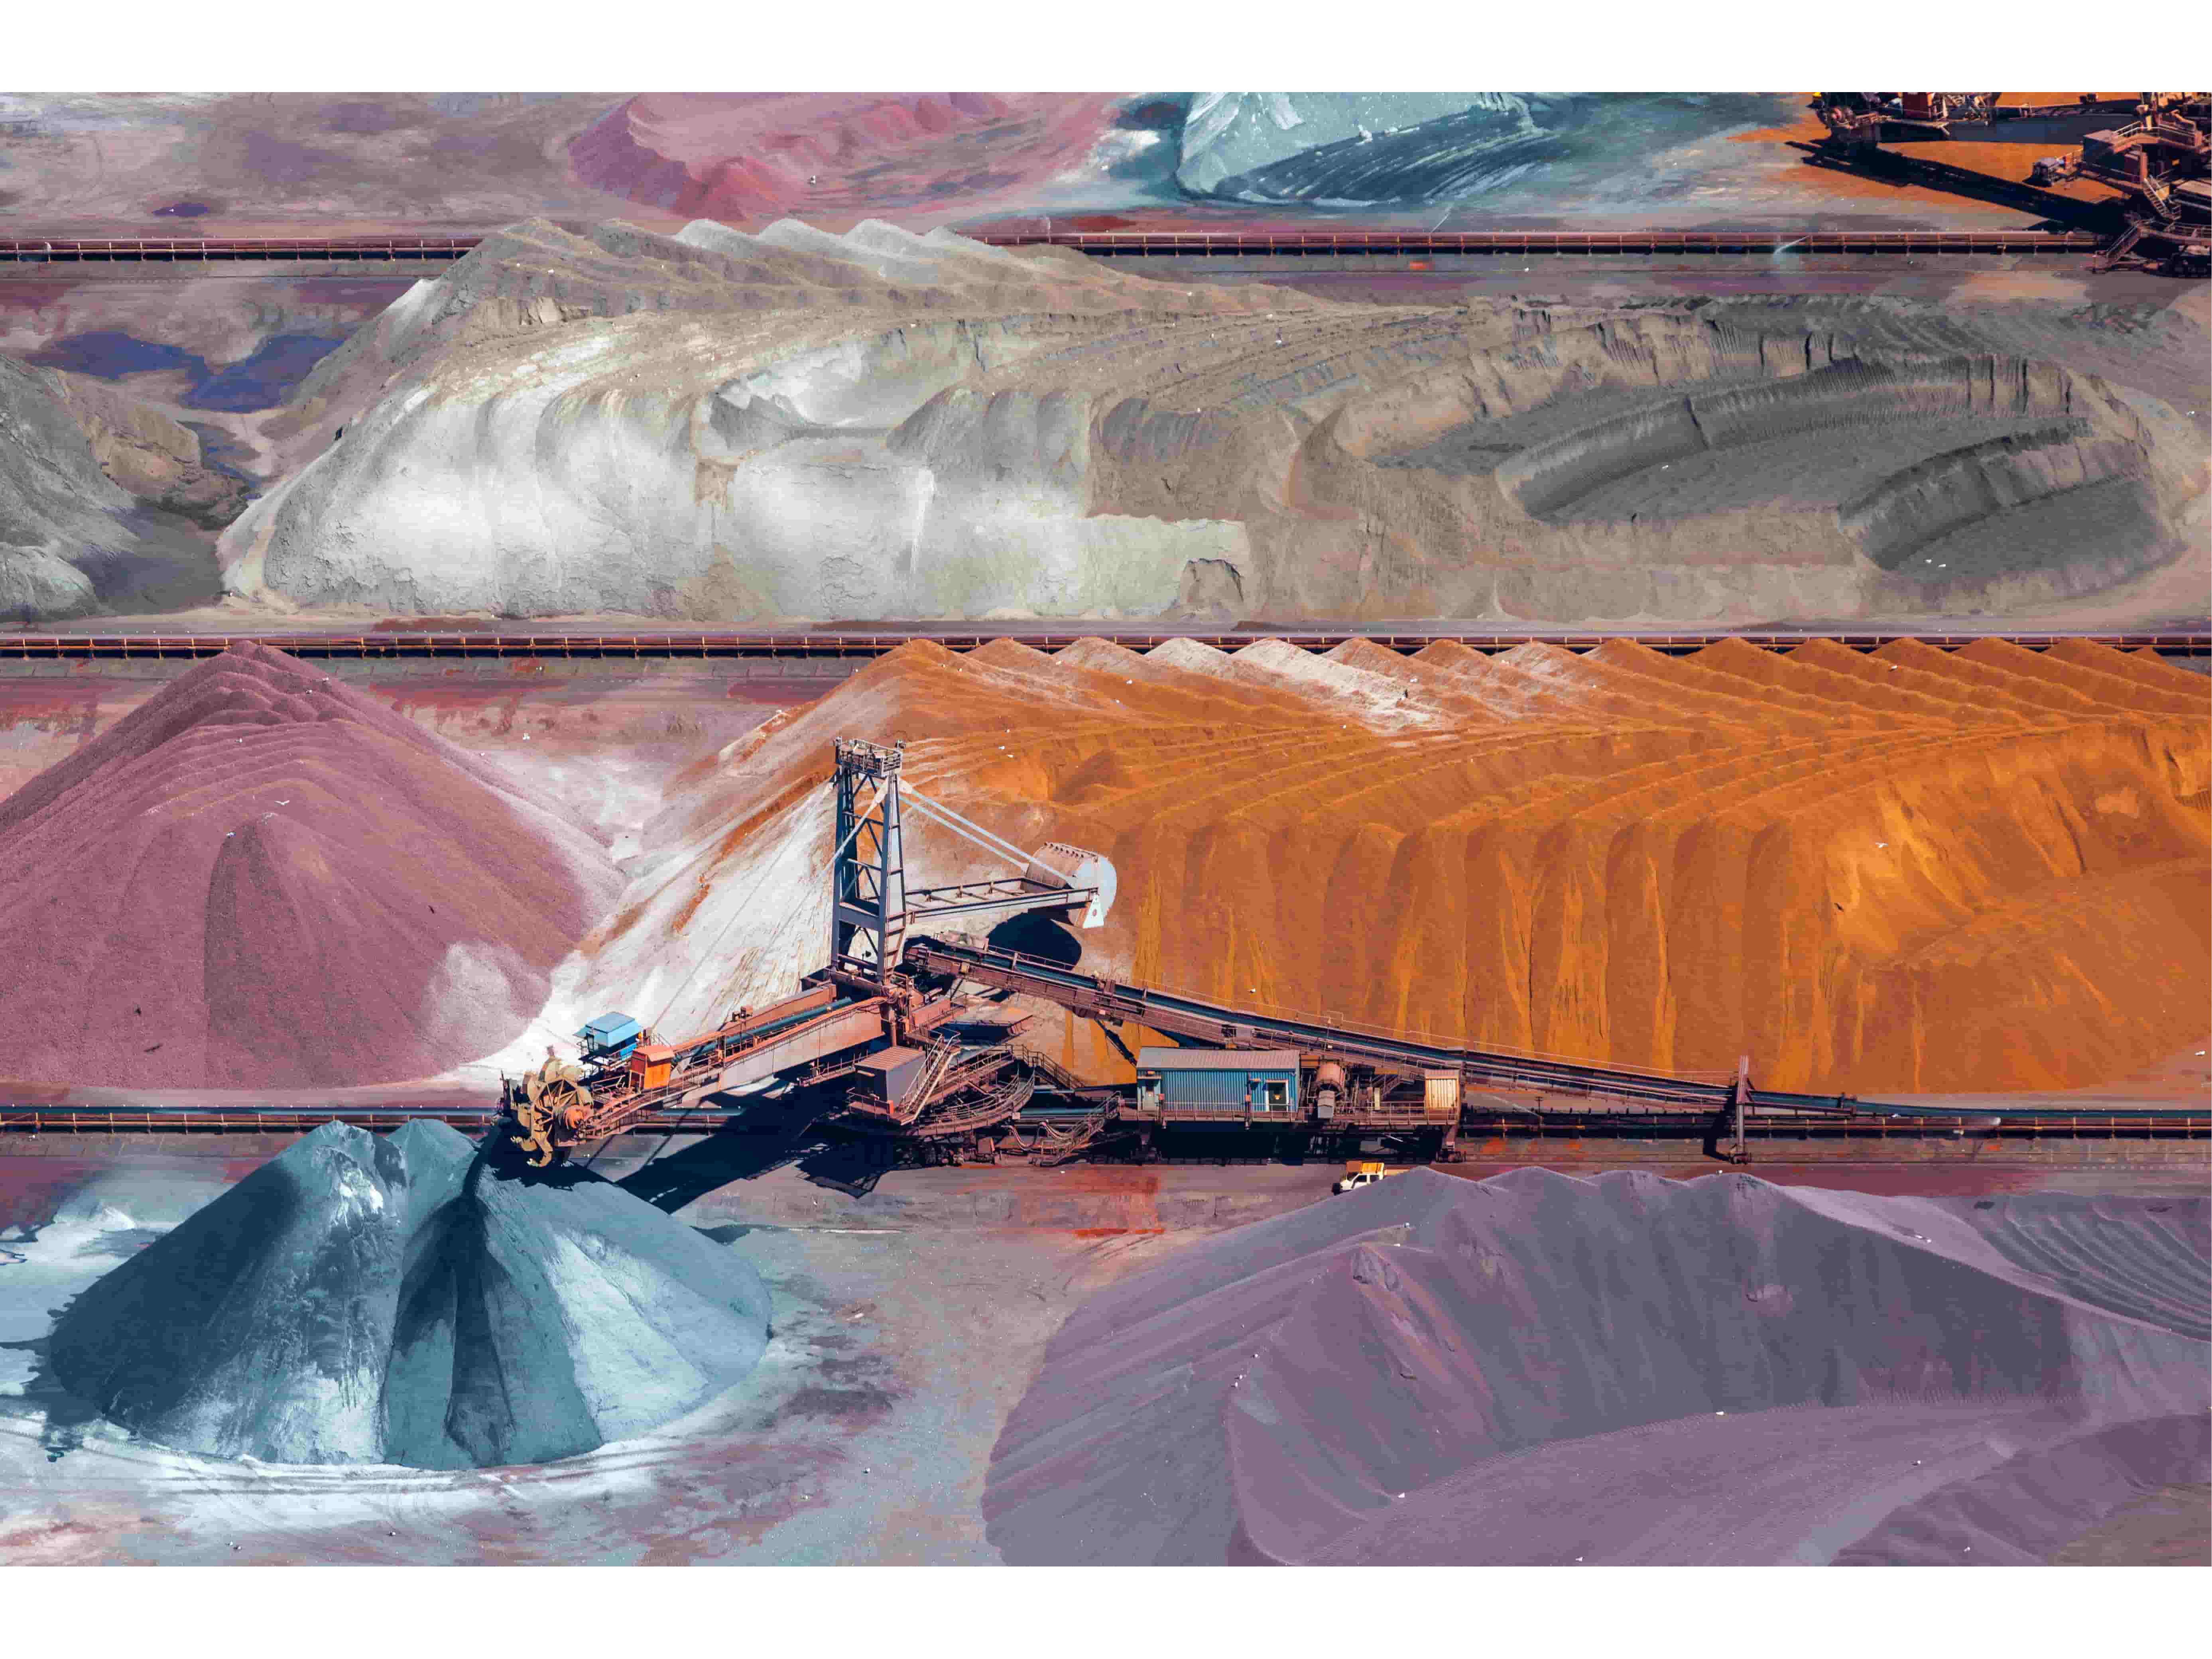 arkema-getty-images-c-mining-and-mineral-processing.jpg